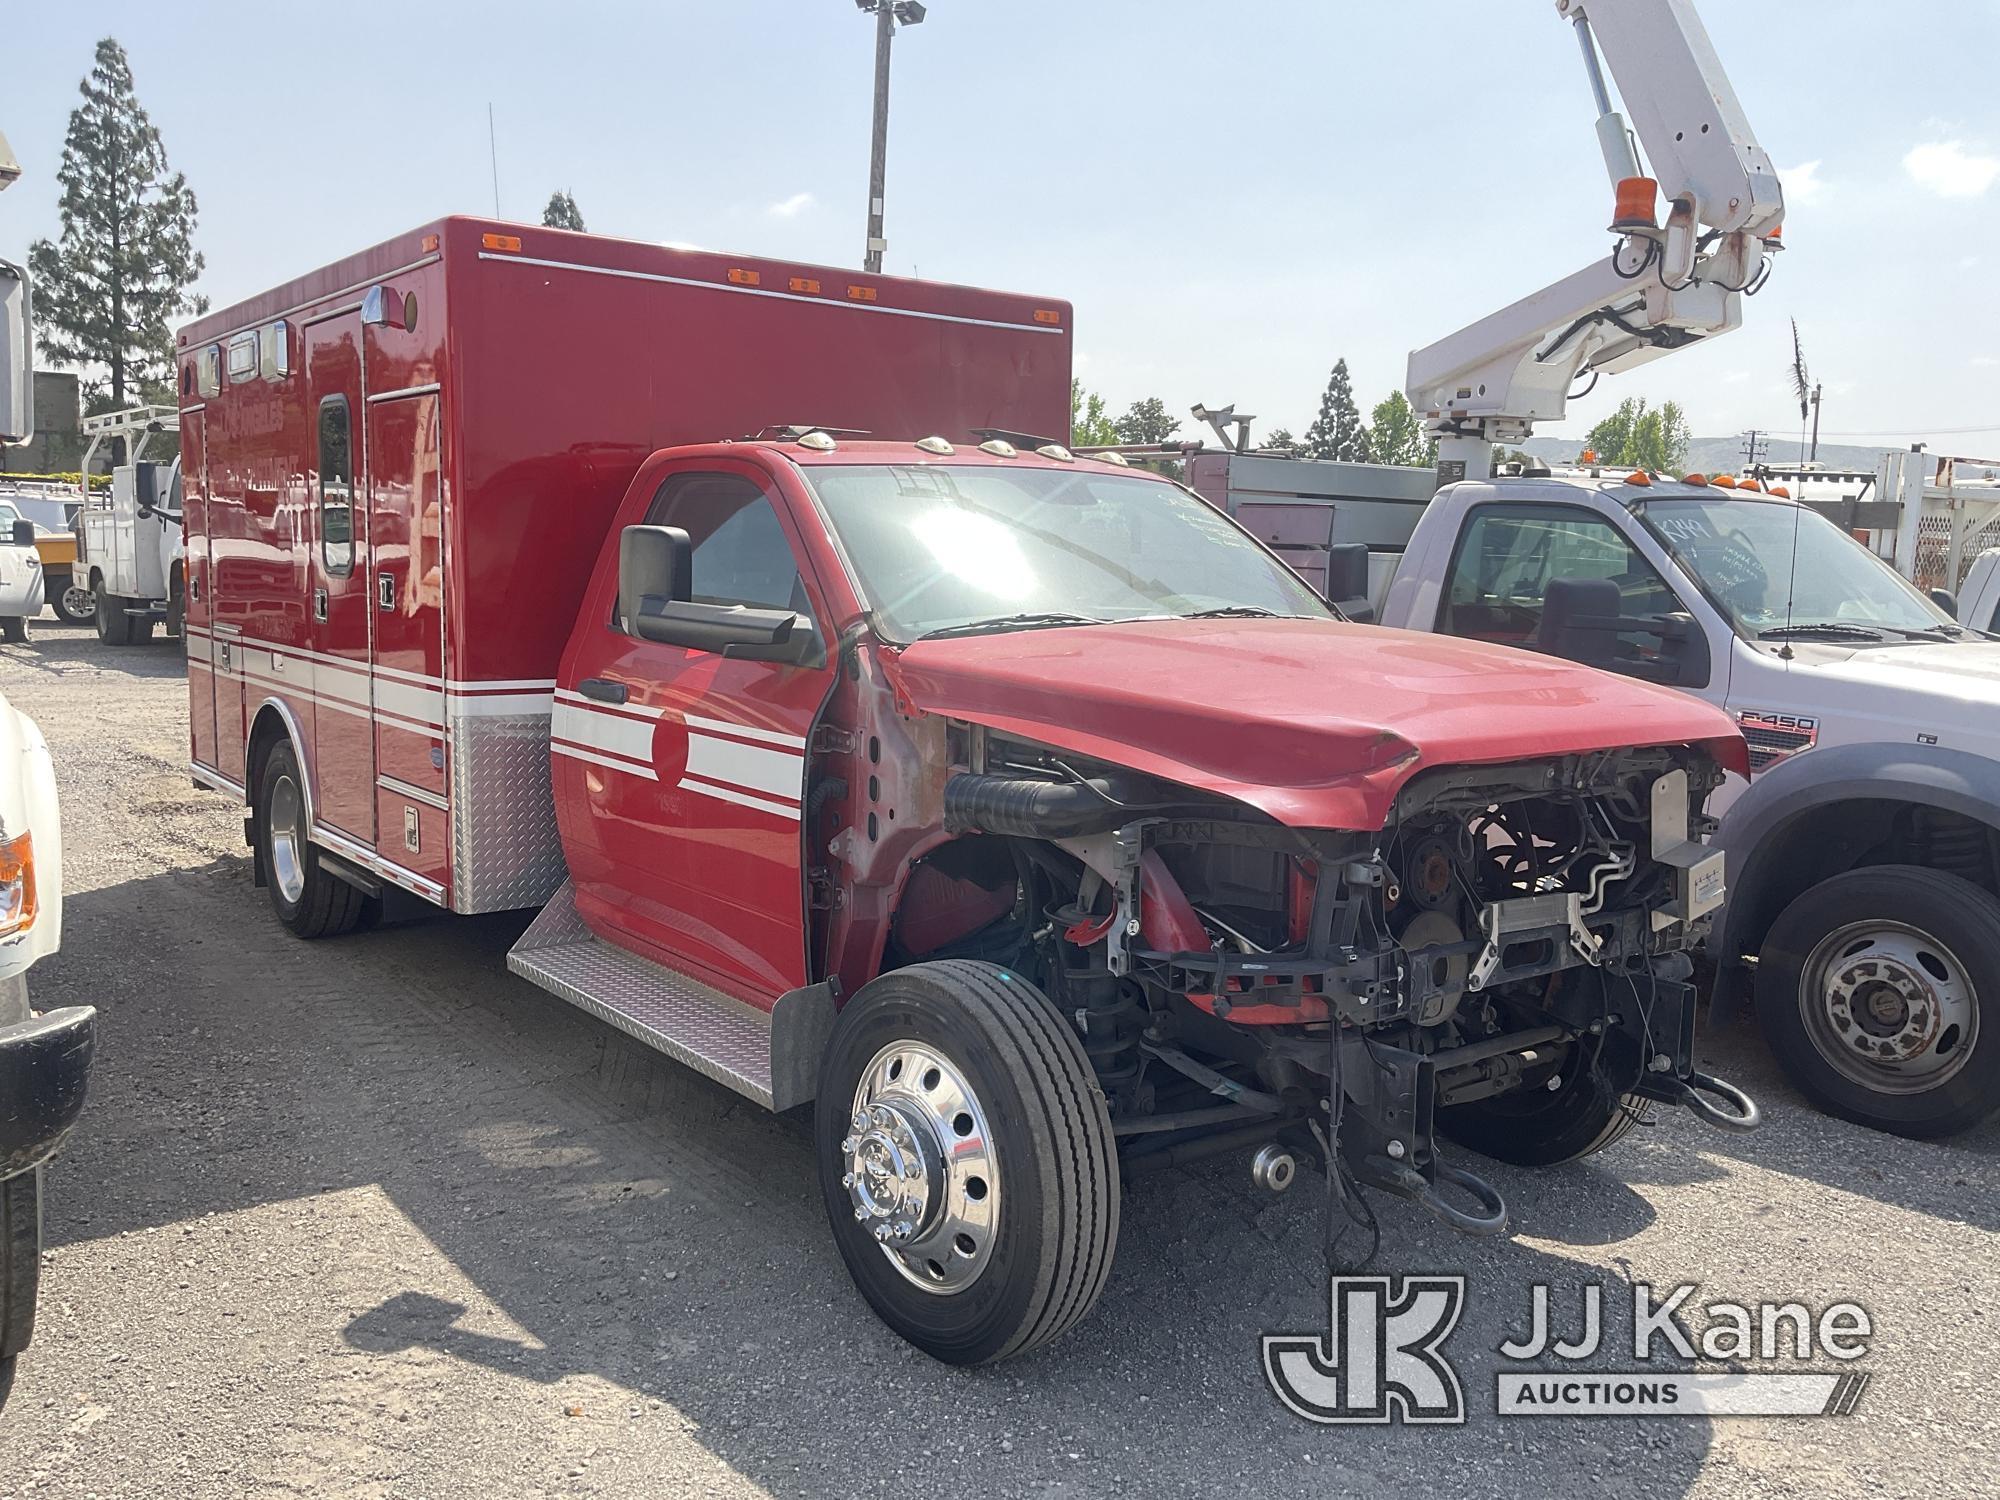 (Jurupa Valley, CA) 2017 RAM 4500 Cab & Chassis Not Running, Engine Is Stuck, Front End Damage, Stri